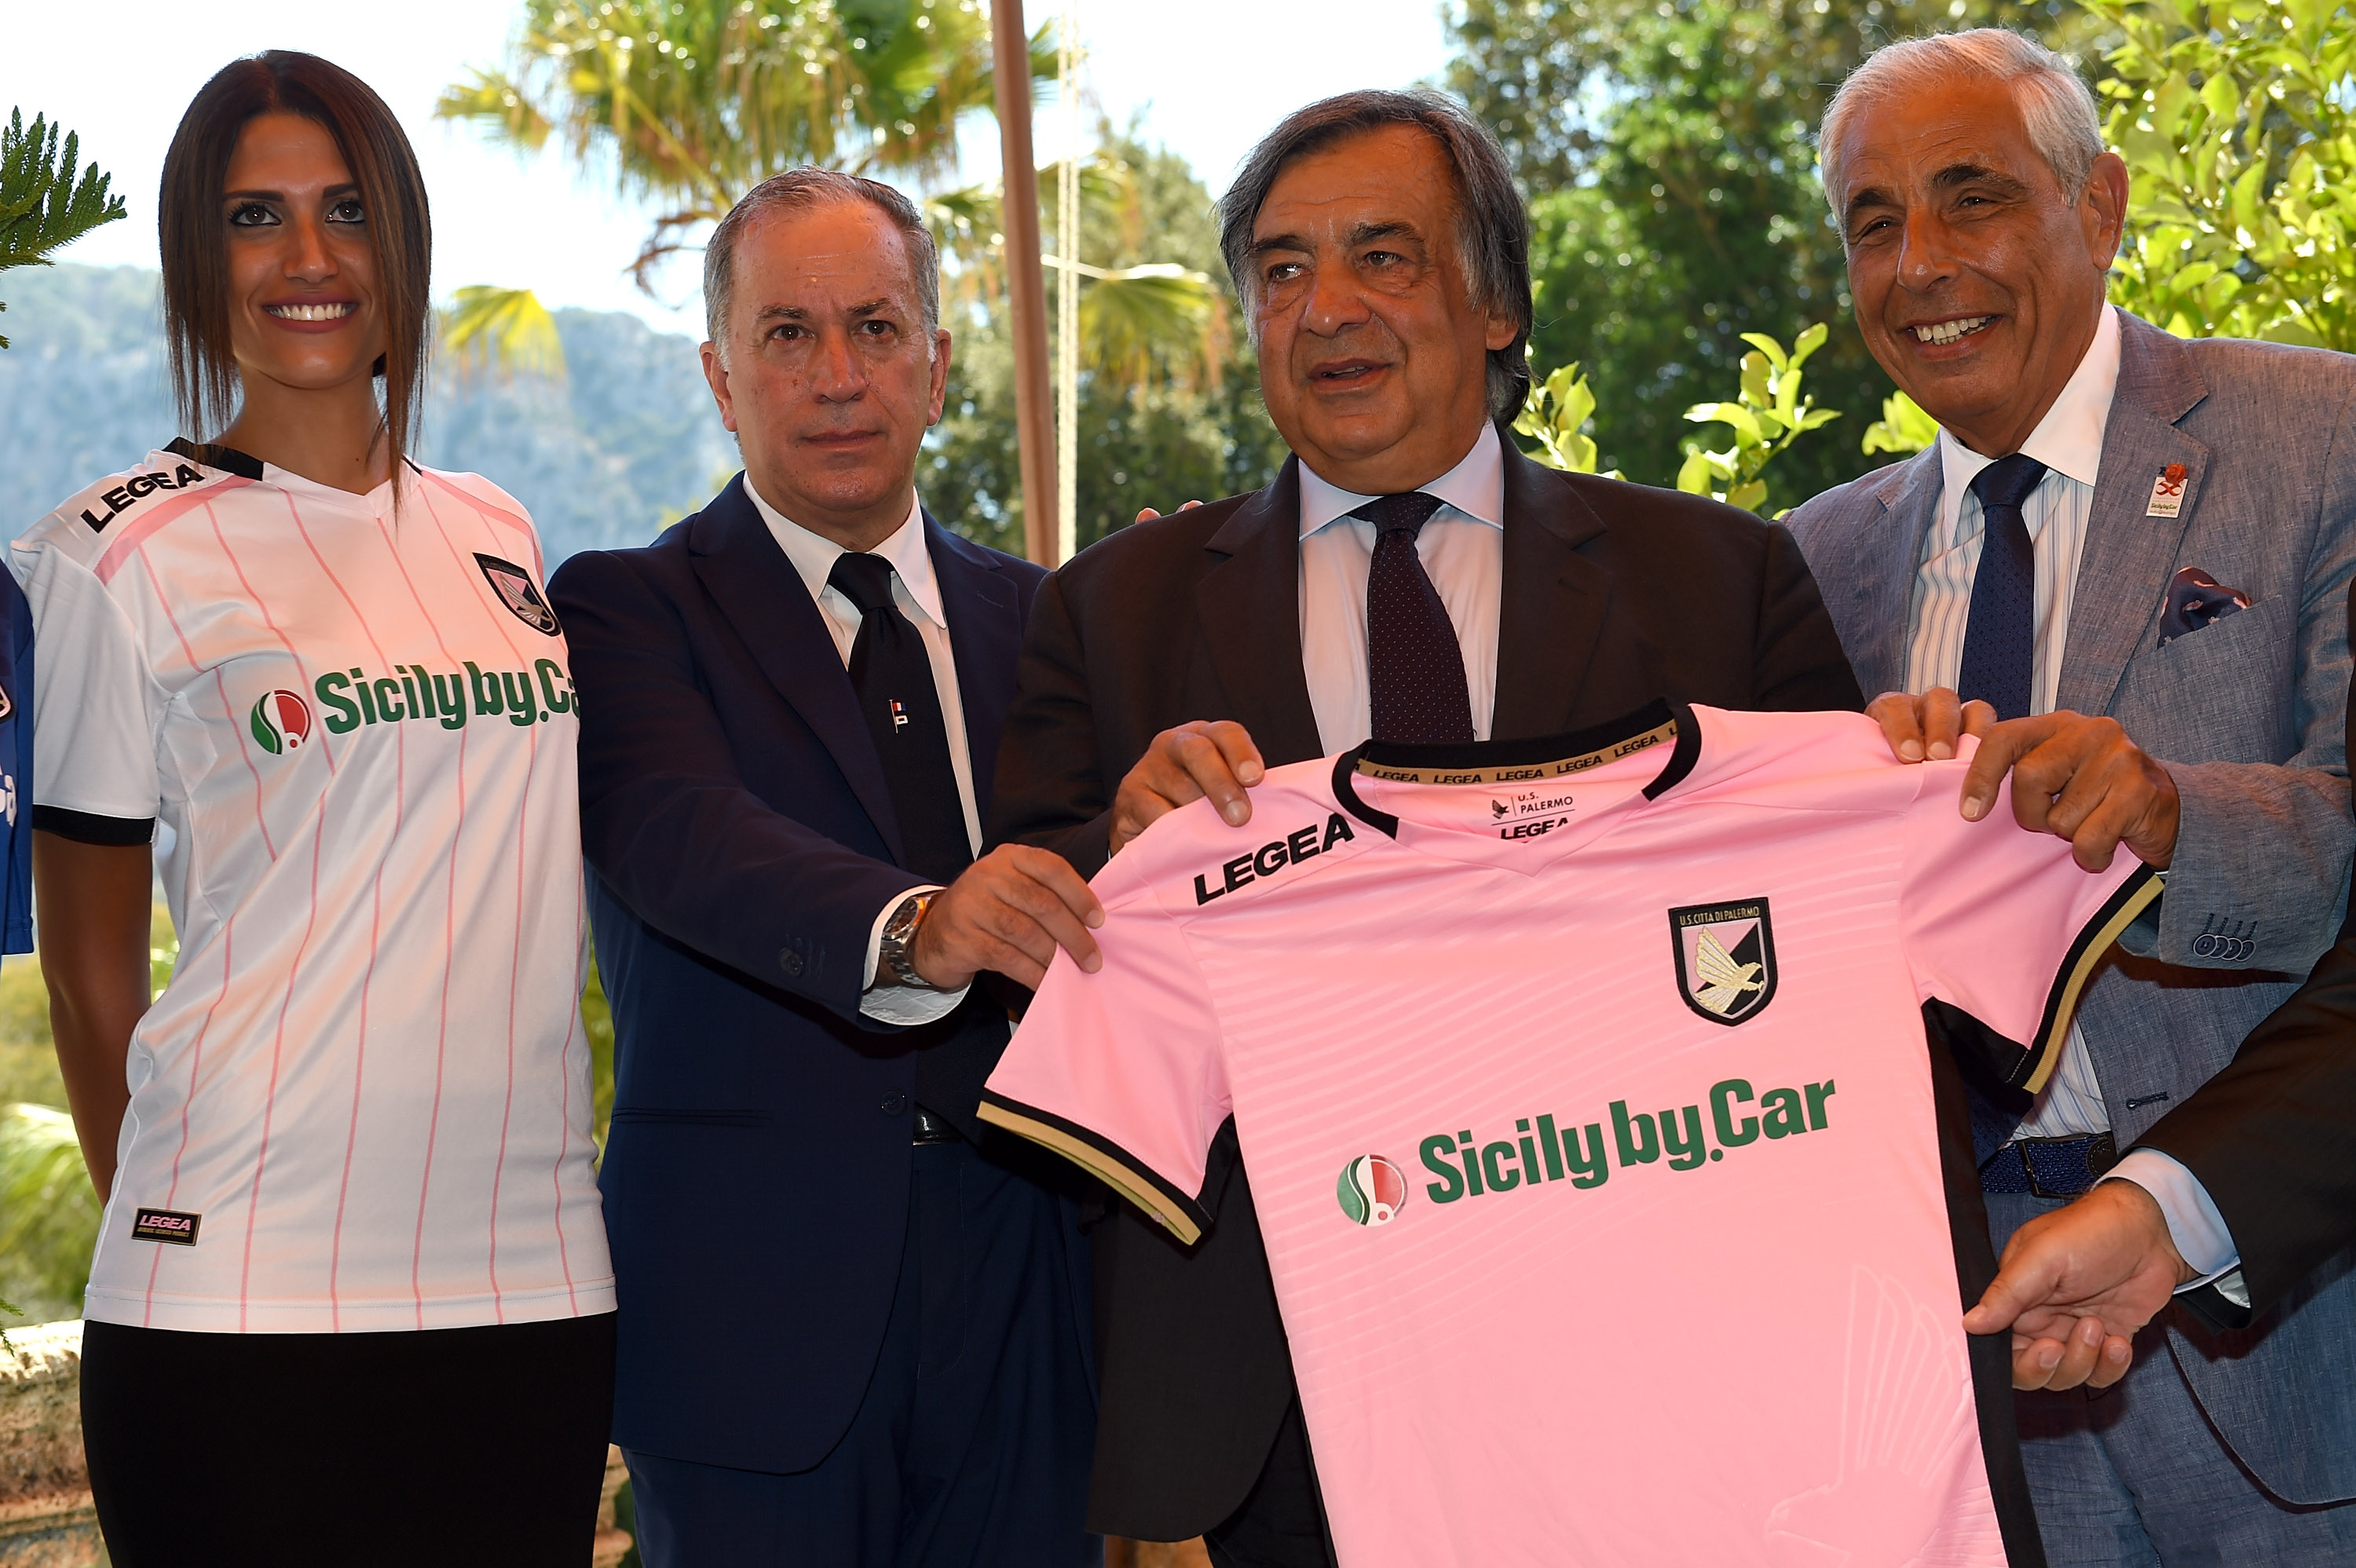 PALERMO, ITALY - AUGUST 22: Tony Sichera of US Citta' di Palermo, Leoluca Orlando Mayor of Palermo and Tommaso Dragotto of Sicily by Car pose during the presentation of Sicily by Car as new main sponsor of US Citta' di Palermo at Villa Niscemi on August 22, 2017 in Palermo, Italy.  (Photo by Tullio M. Puglia/Getty Images)